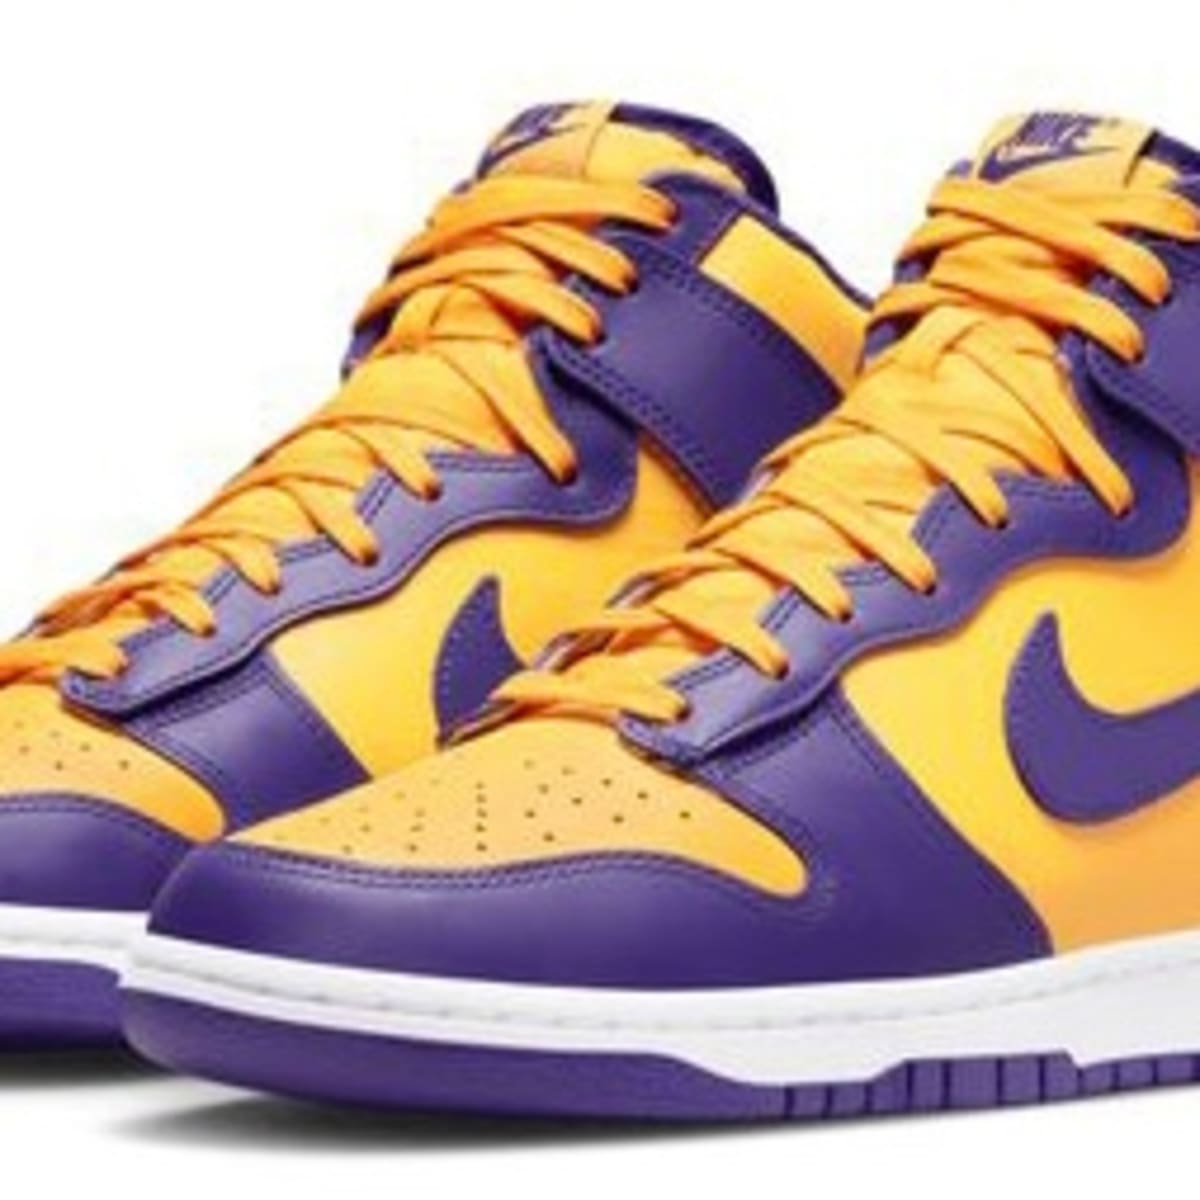 Nike Dunk High 'Lakers' Still Available at Retail - Sports Illustrated Kicks News, Analysis and More